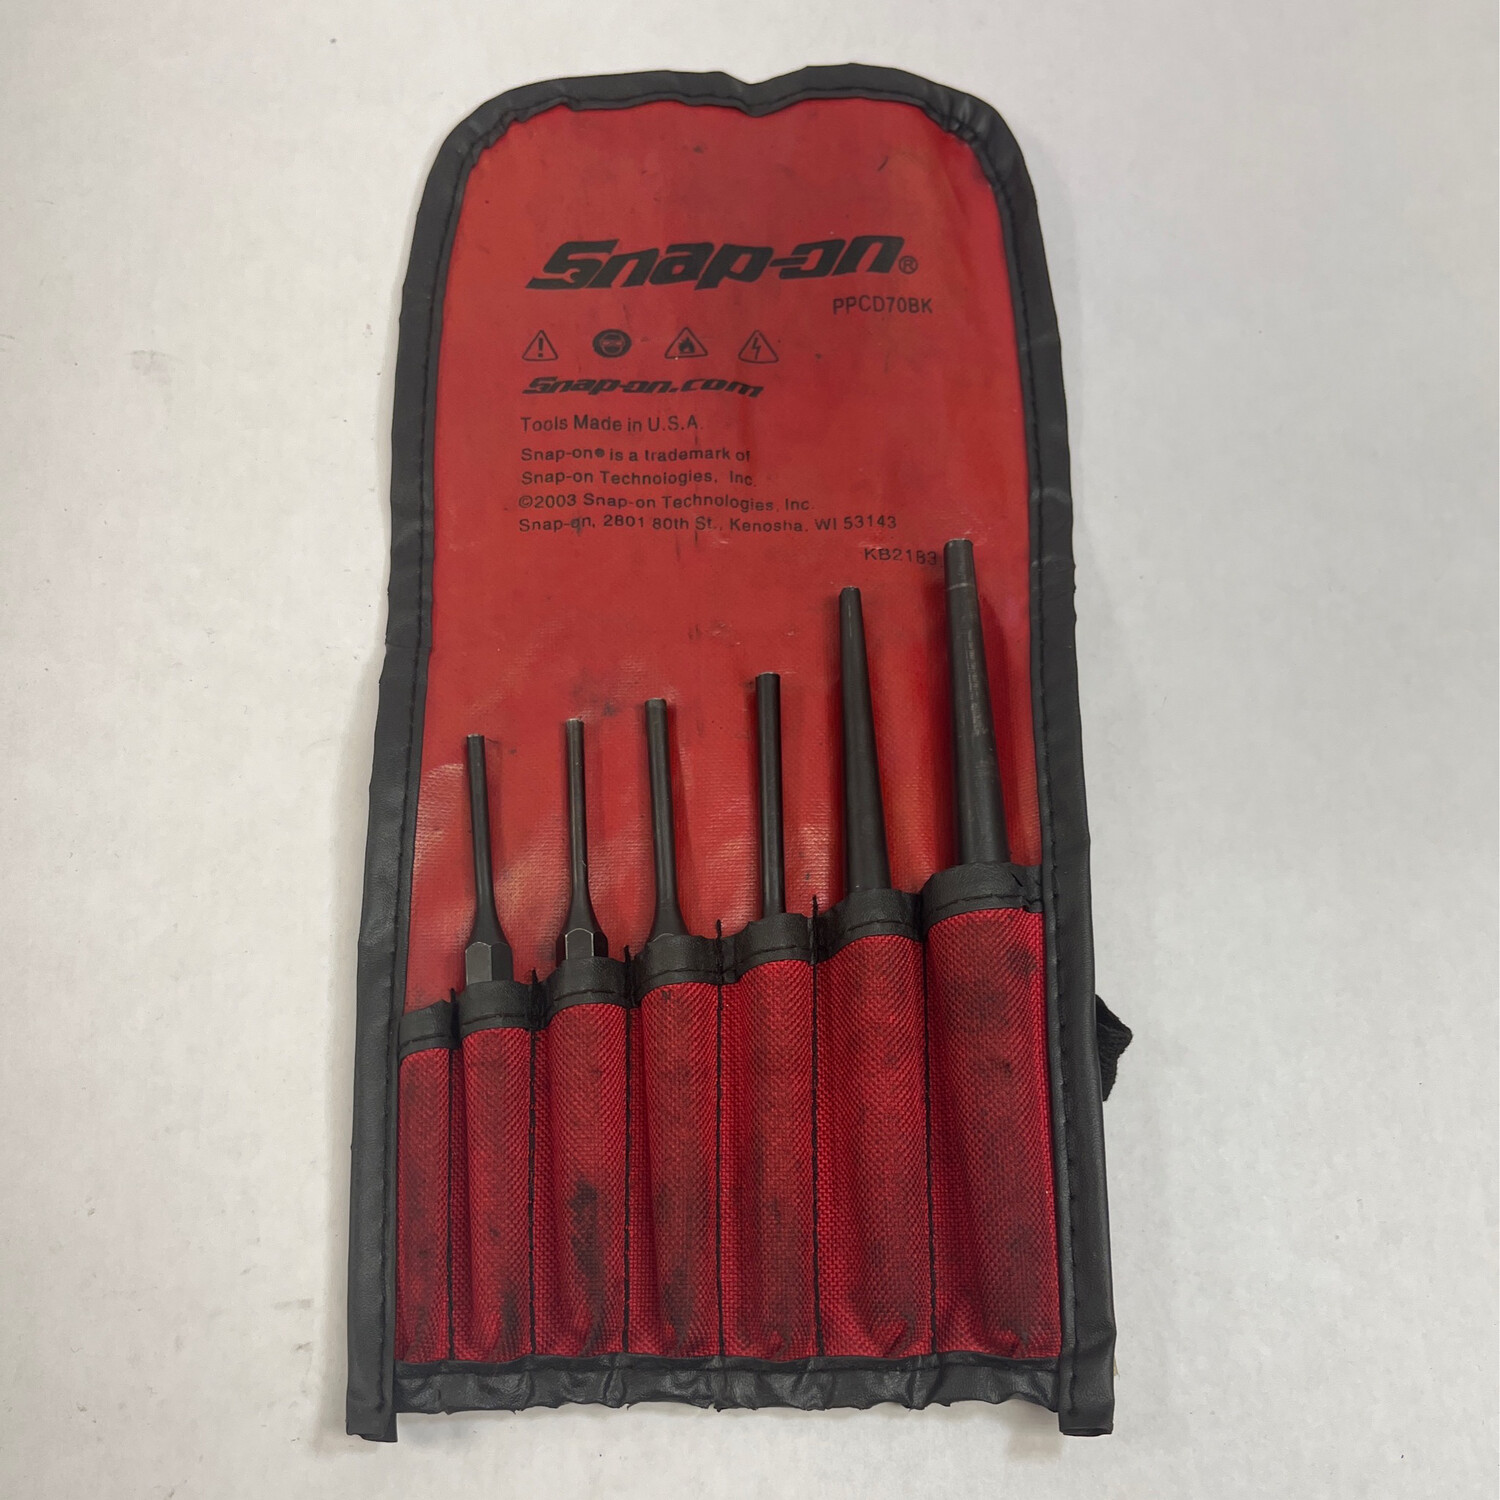 Snap On 7 Pc. Punch and Chisel Set, PPCD70BK